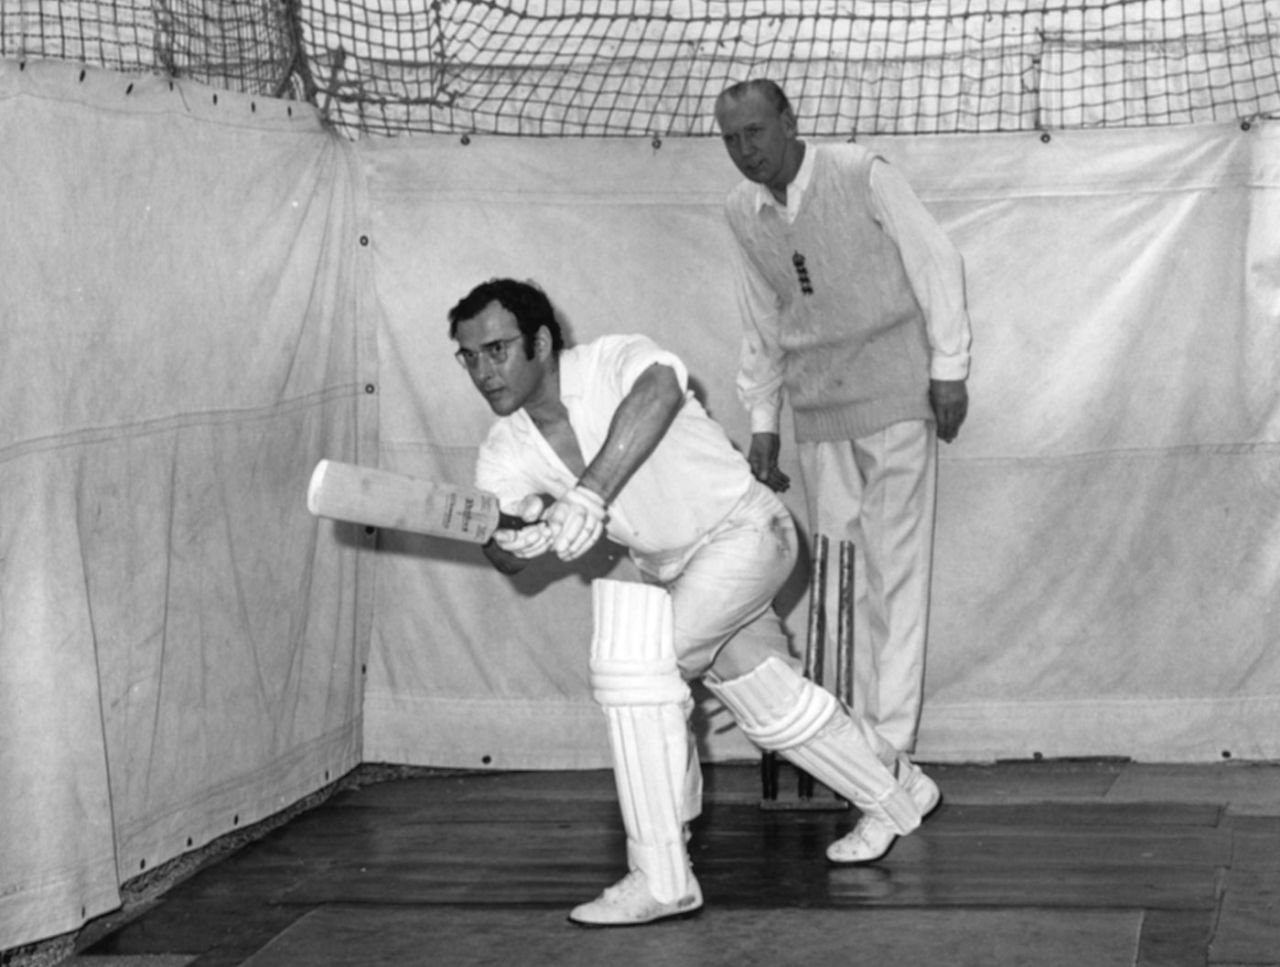 Playwright Harold Pinter bats in the nets watched by coach Alf Gover in his indoor cricket school in London, May 19, 1961